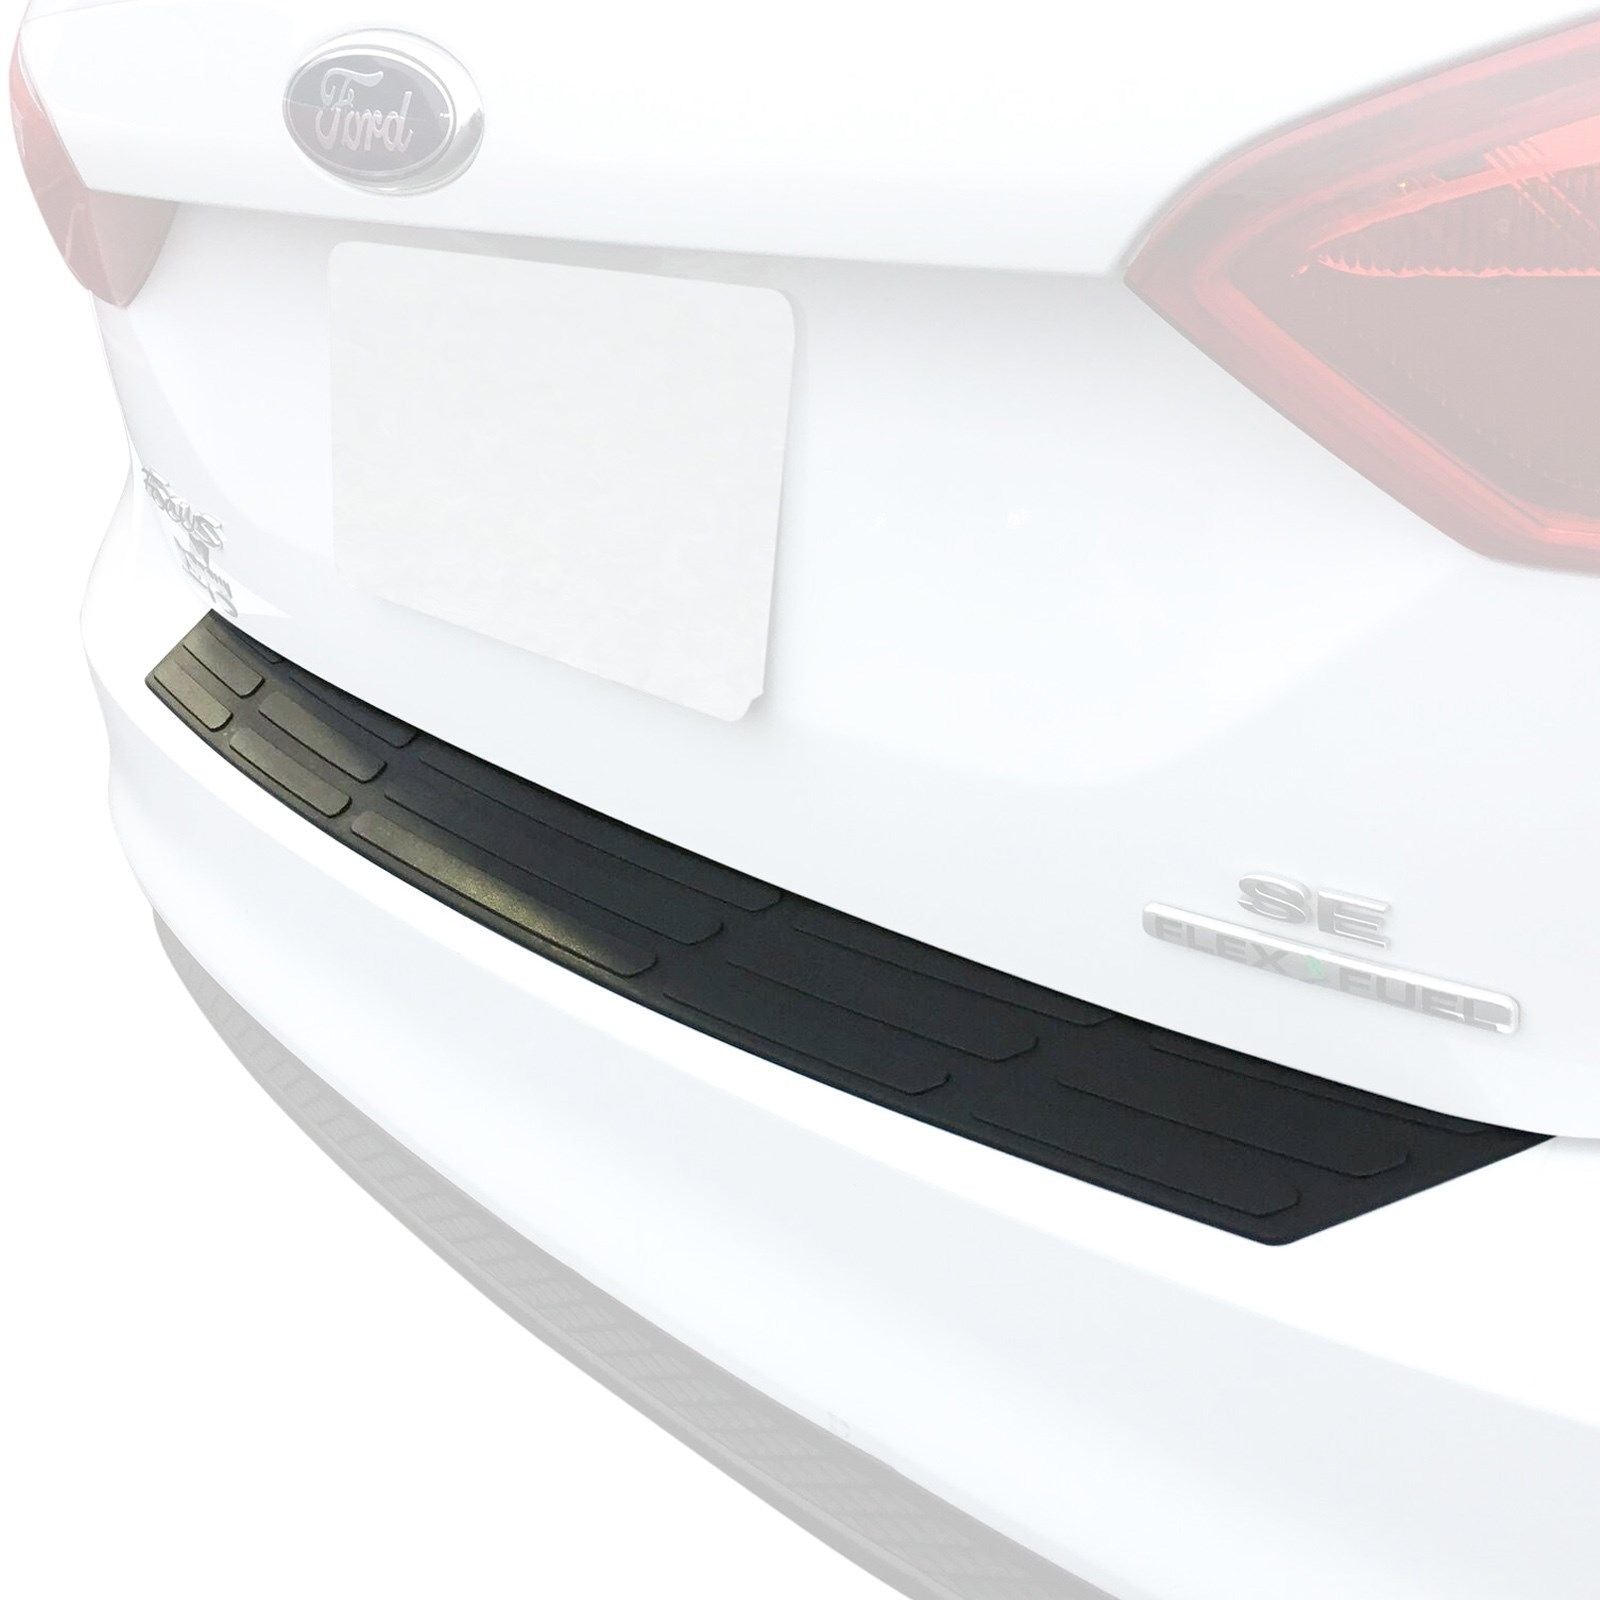 Red Hound Auto Rear Bumper Protector Compatible with Ford Focus Sedan 4-Door Scratch Cover Custom Fit Replacement Black 2012-2019